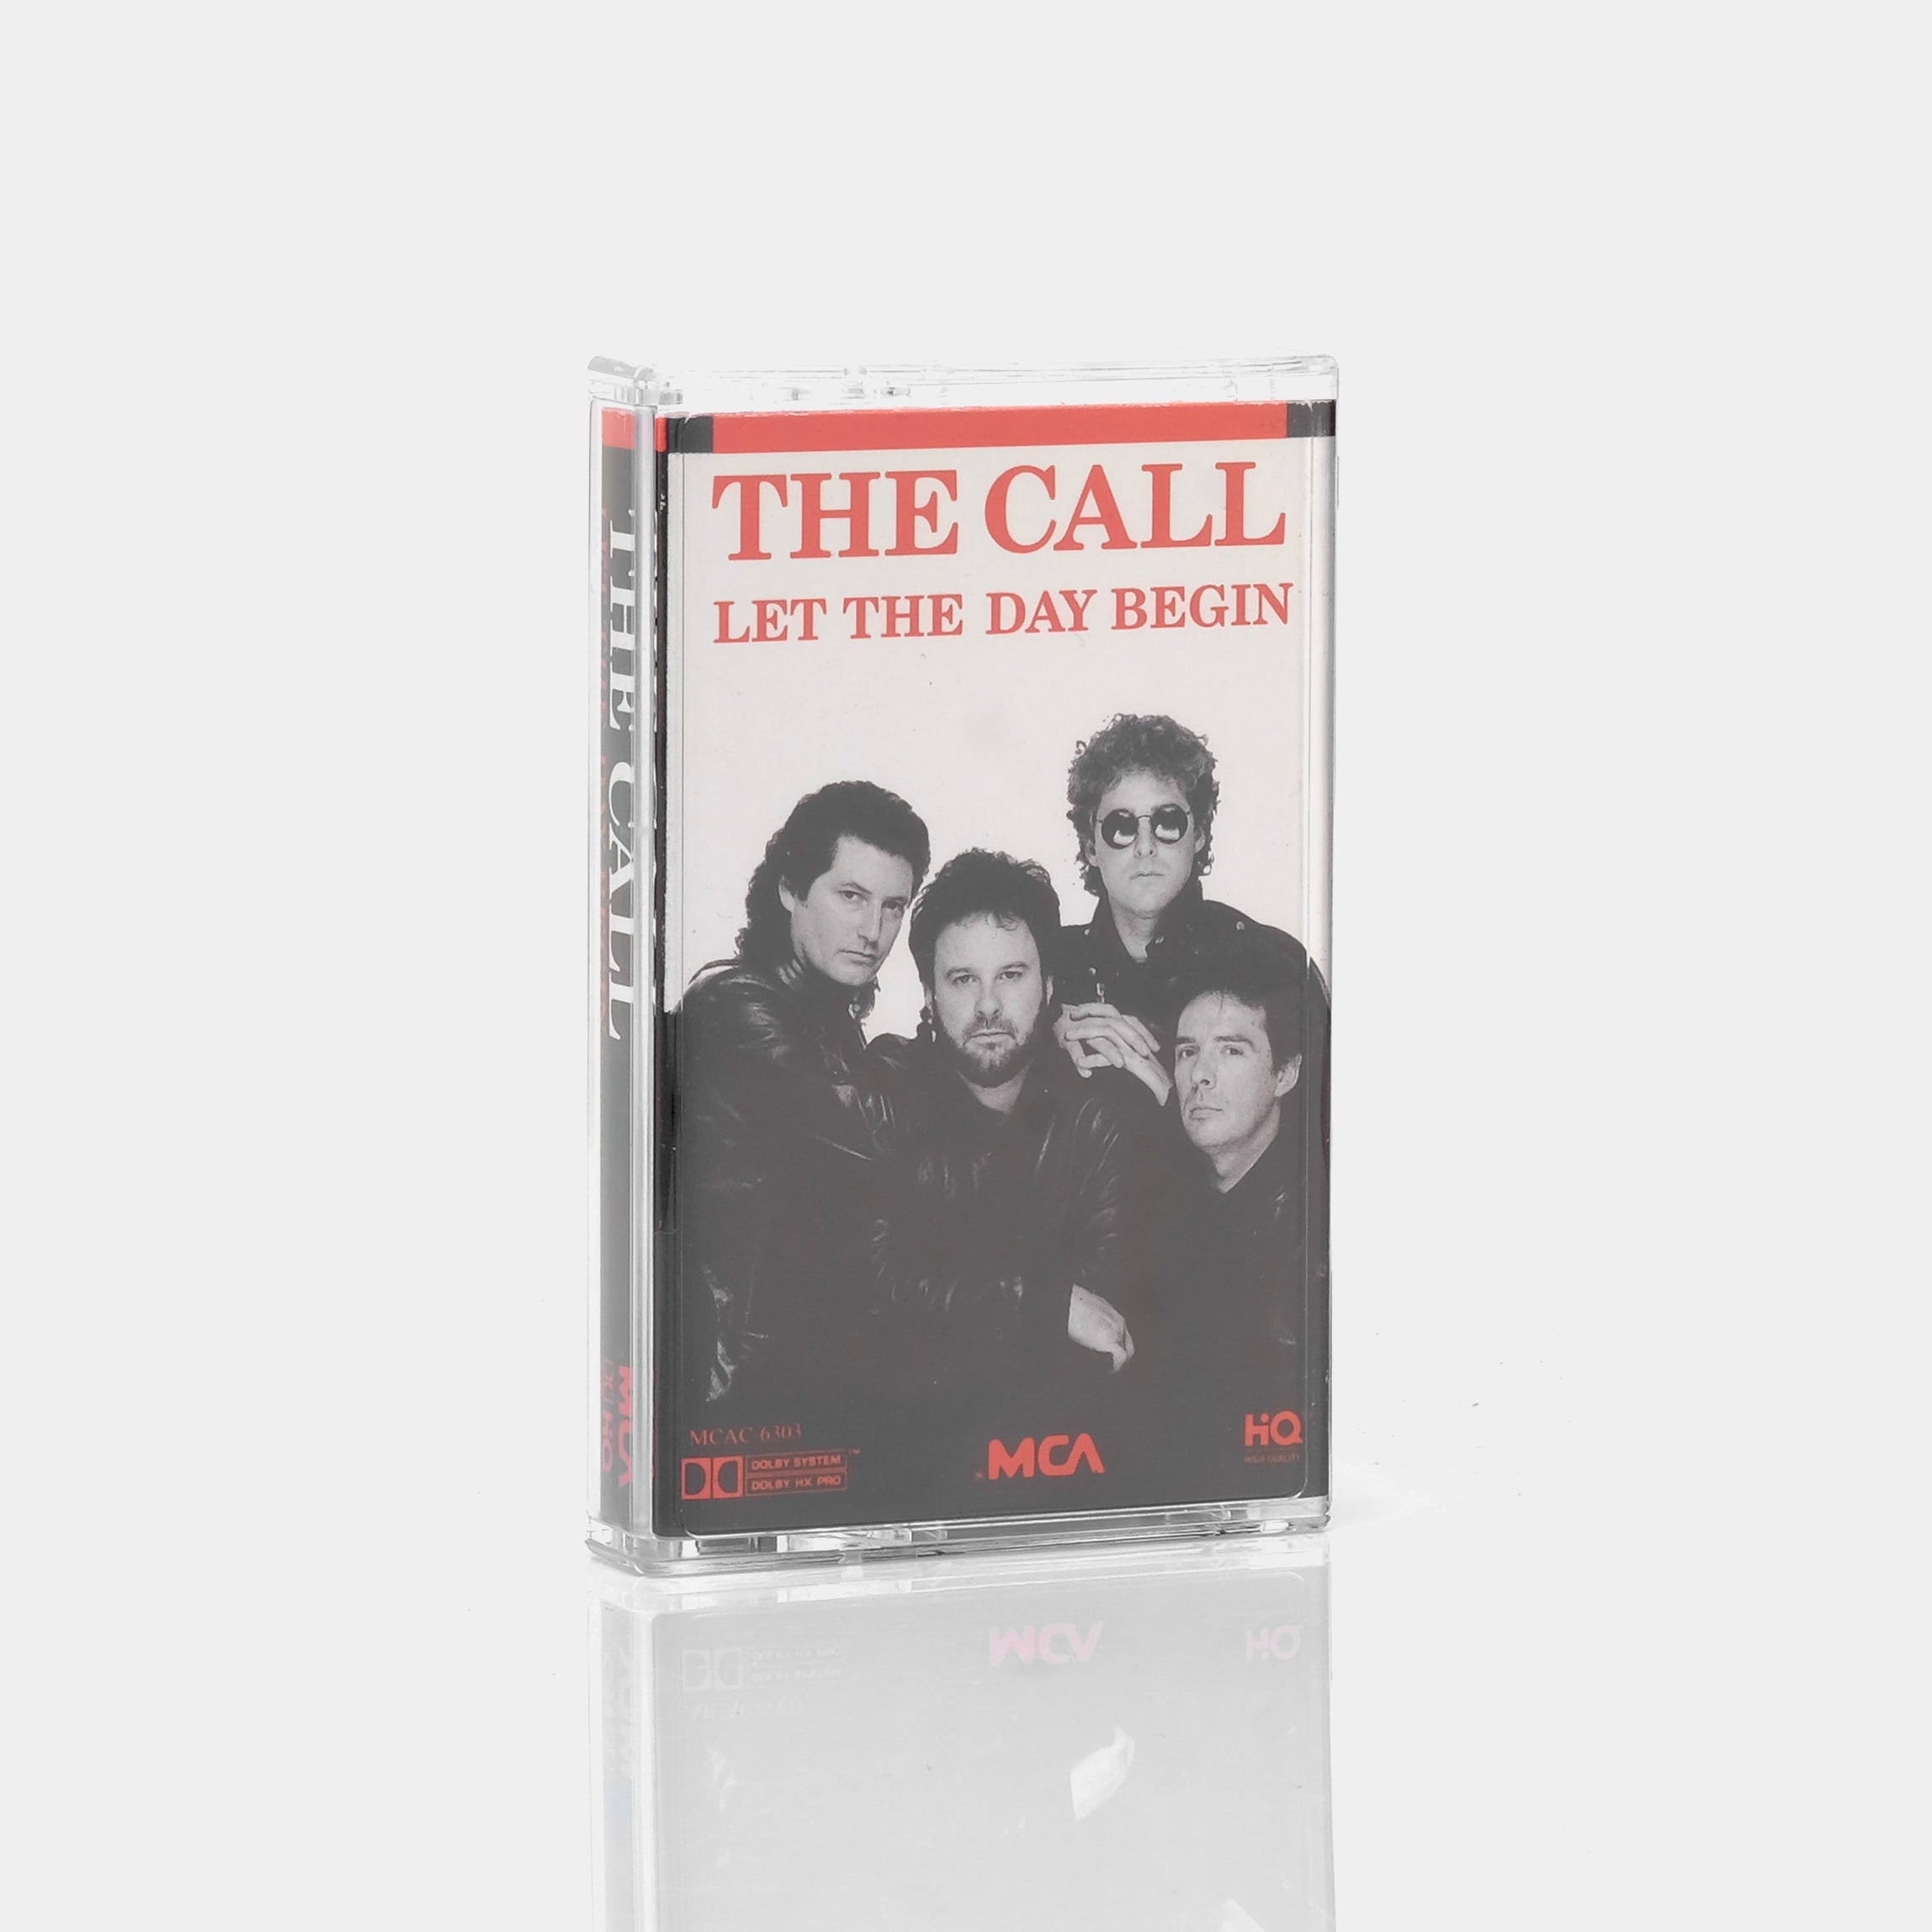 The Call - Let The Day Begin Cassette Tape